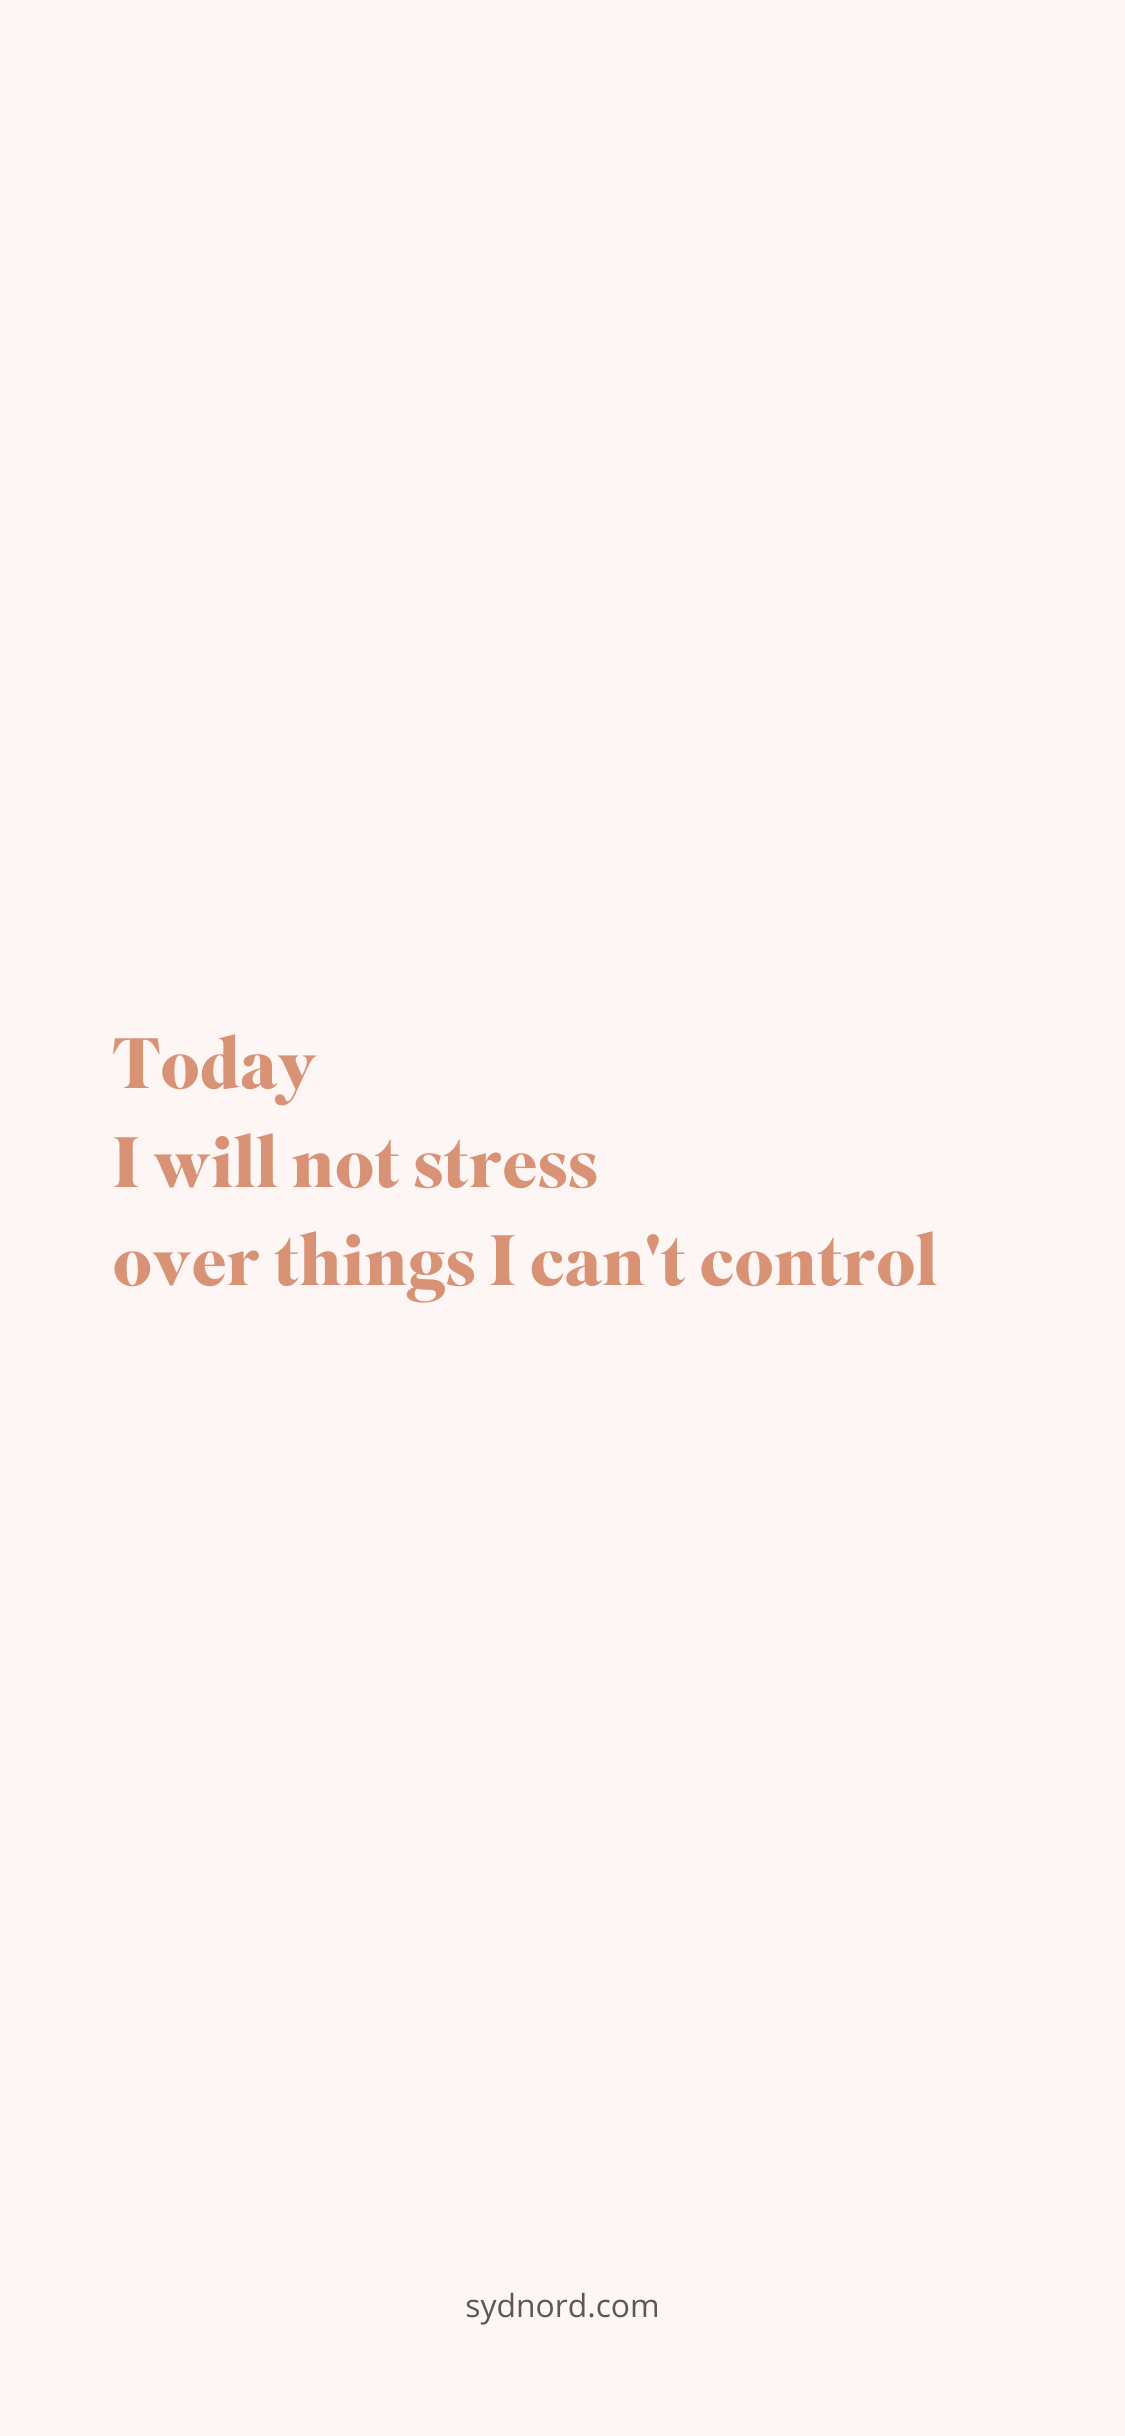 Today I will not stress over things I can't control